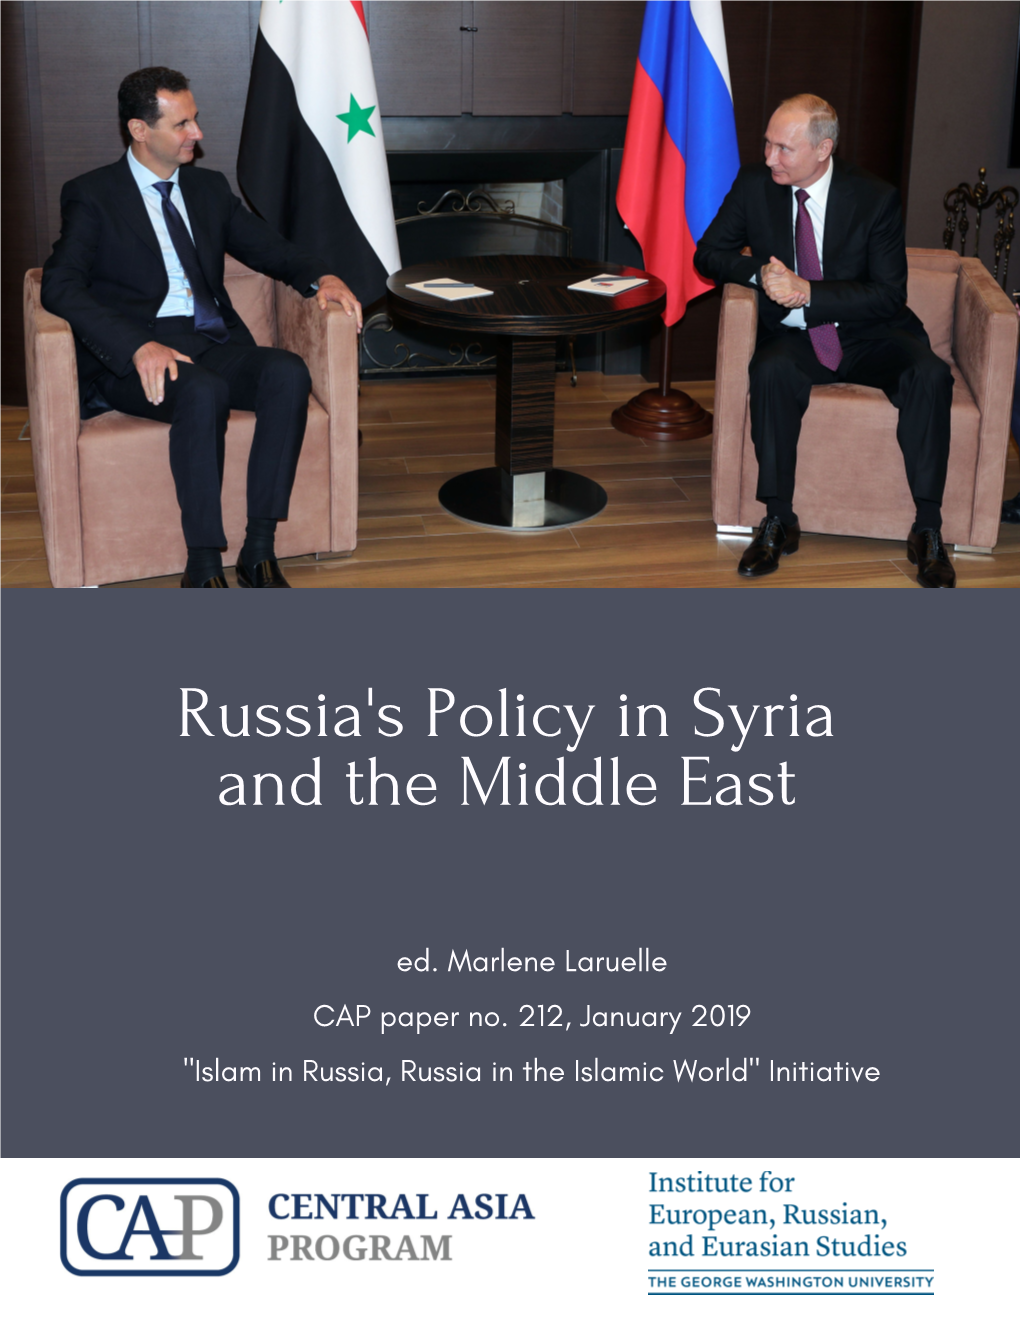 Russia's Policy in Syria and the Middle East